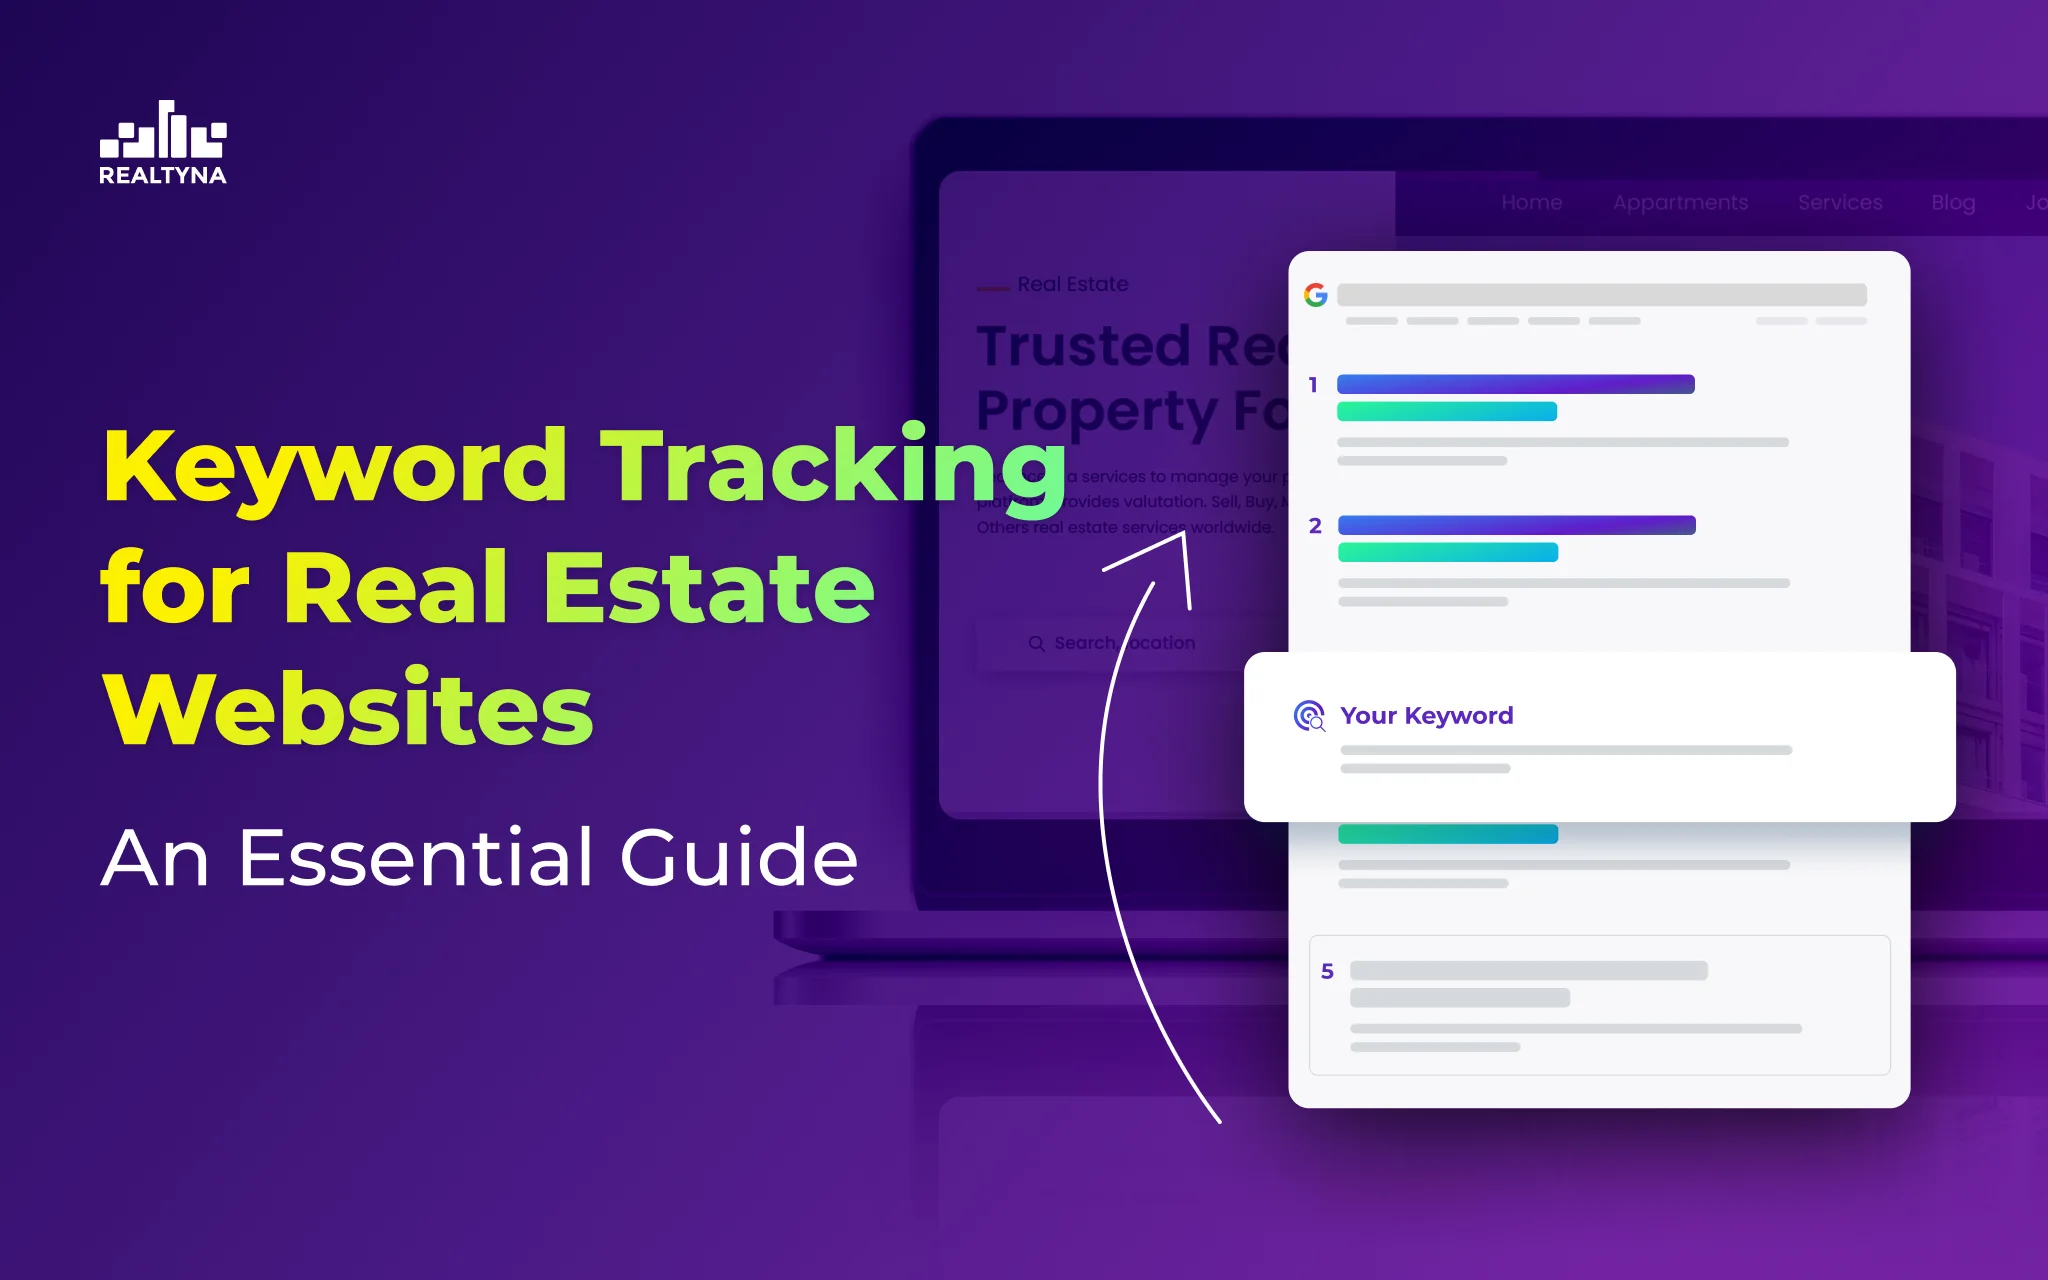 Keyword Tracking for Real Estate Websites: An Essential Guide